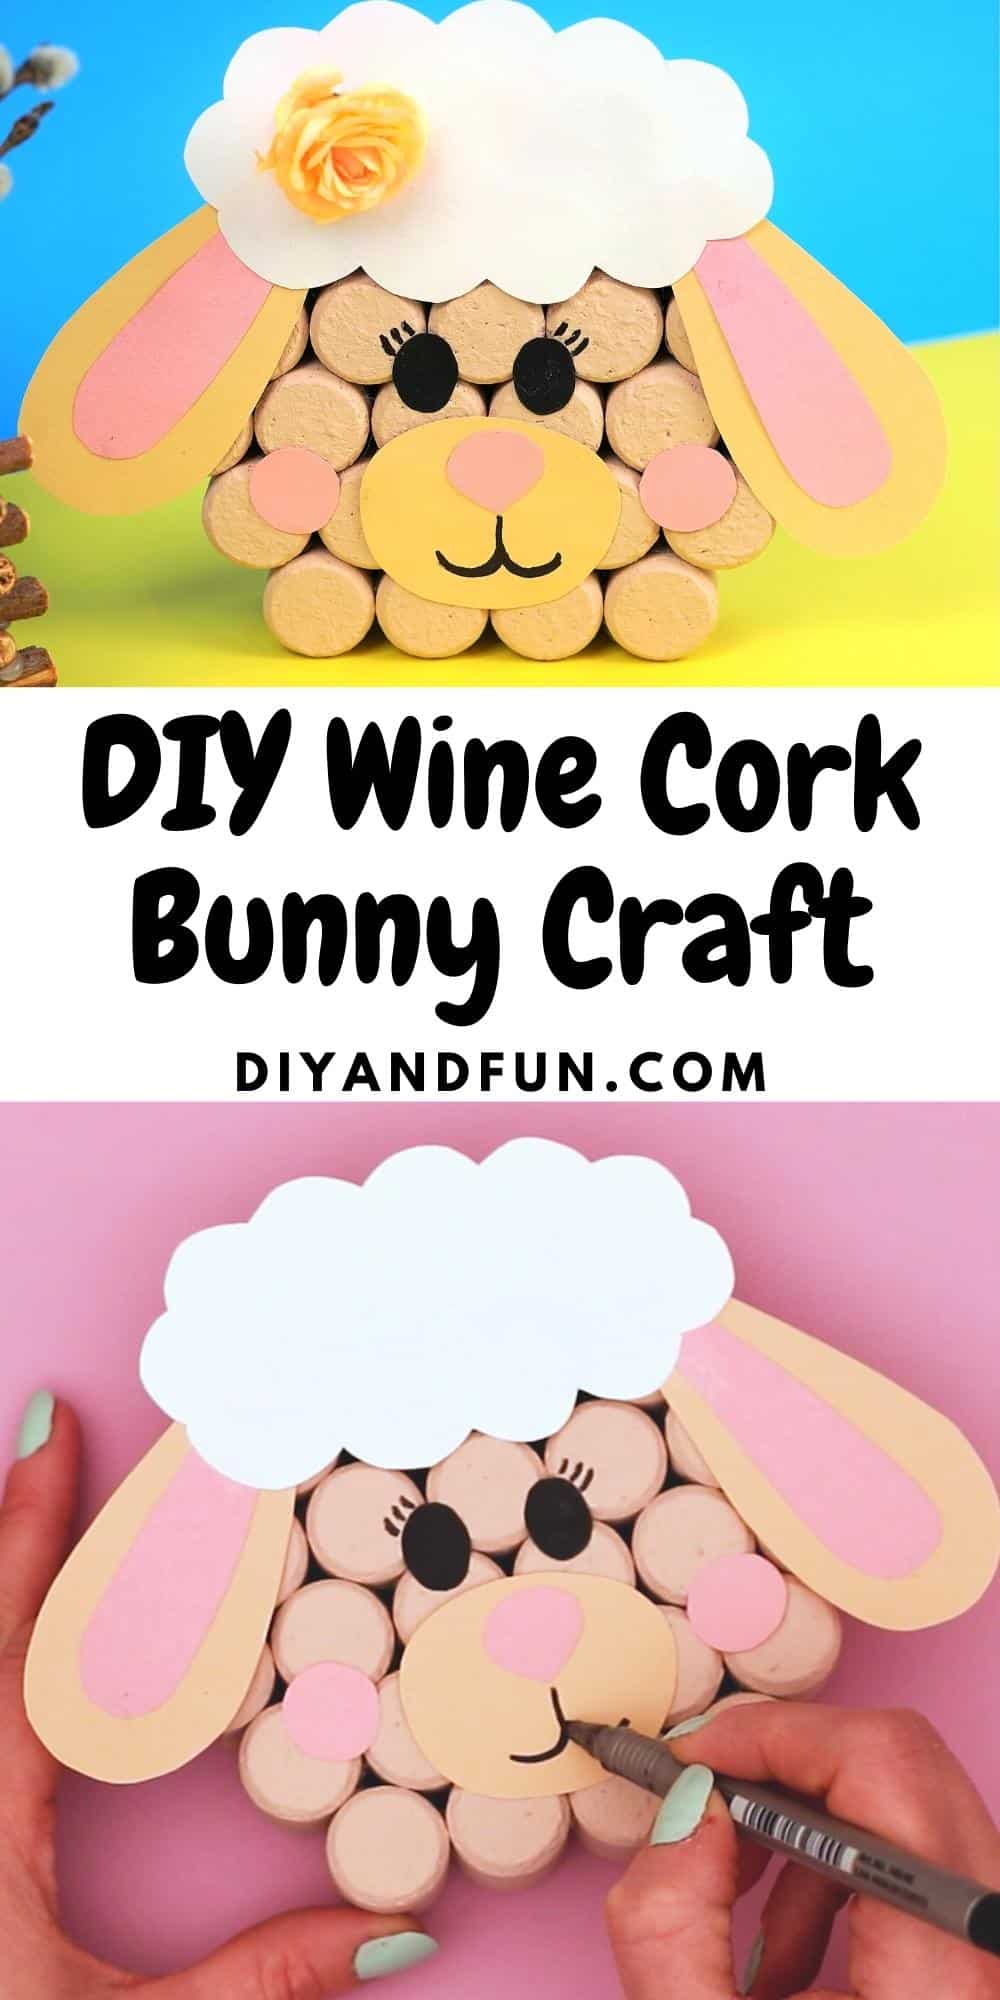 DIY Wine Cork Bunny Craft, Make and adorable Bunny for Spring or Easter using wine corks, a simple project for most ages.